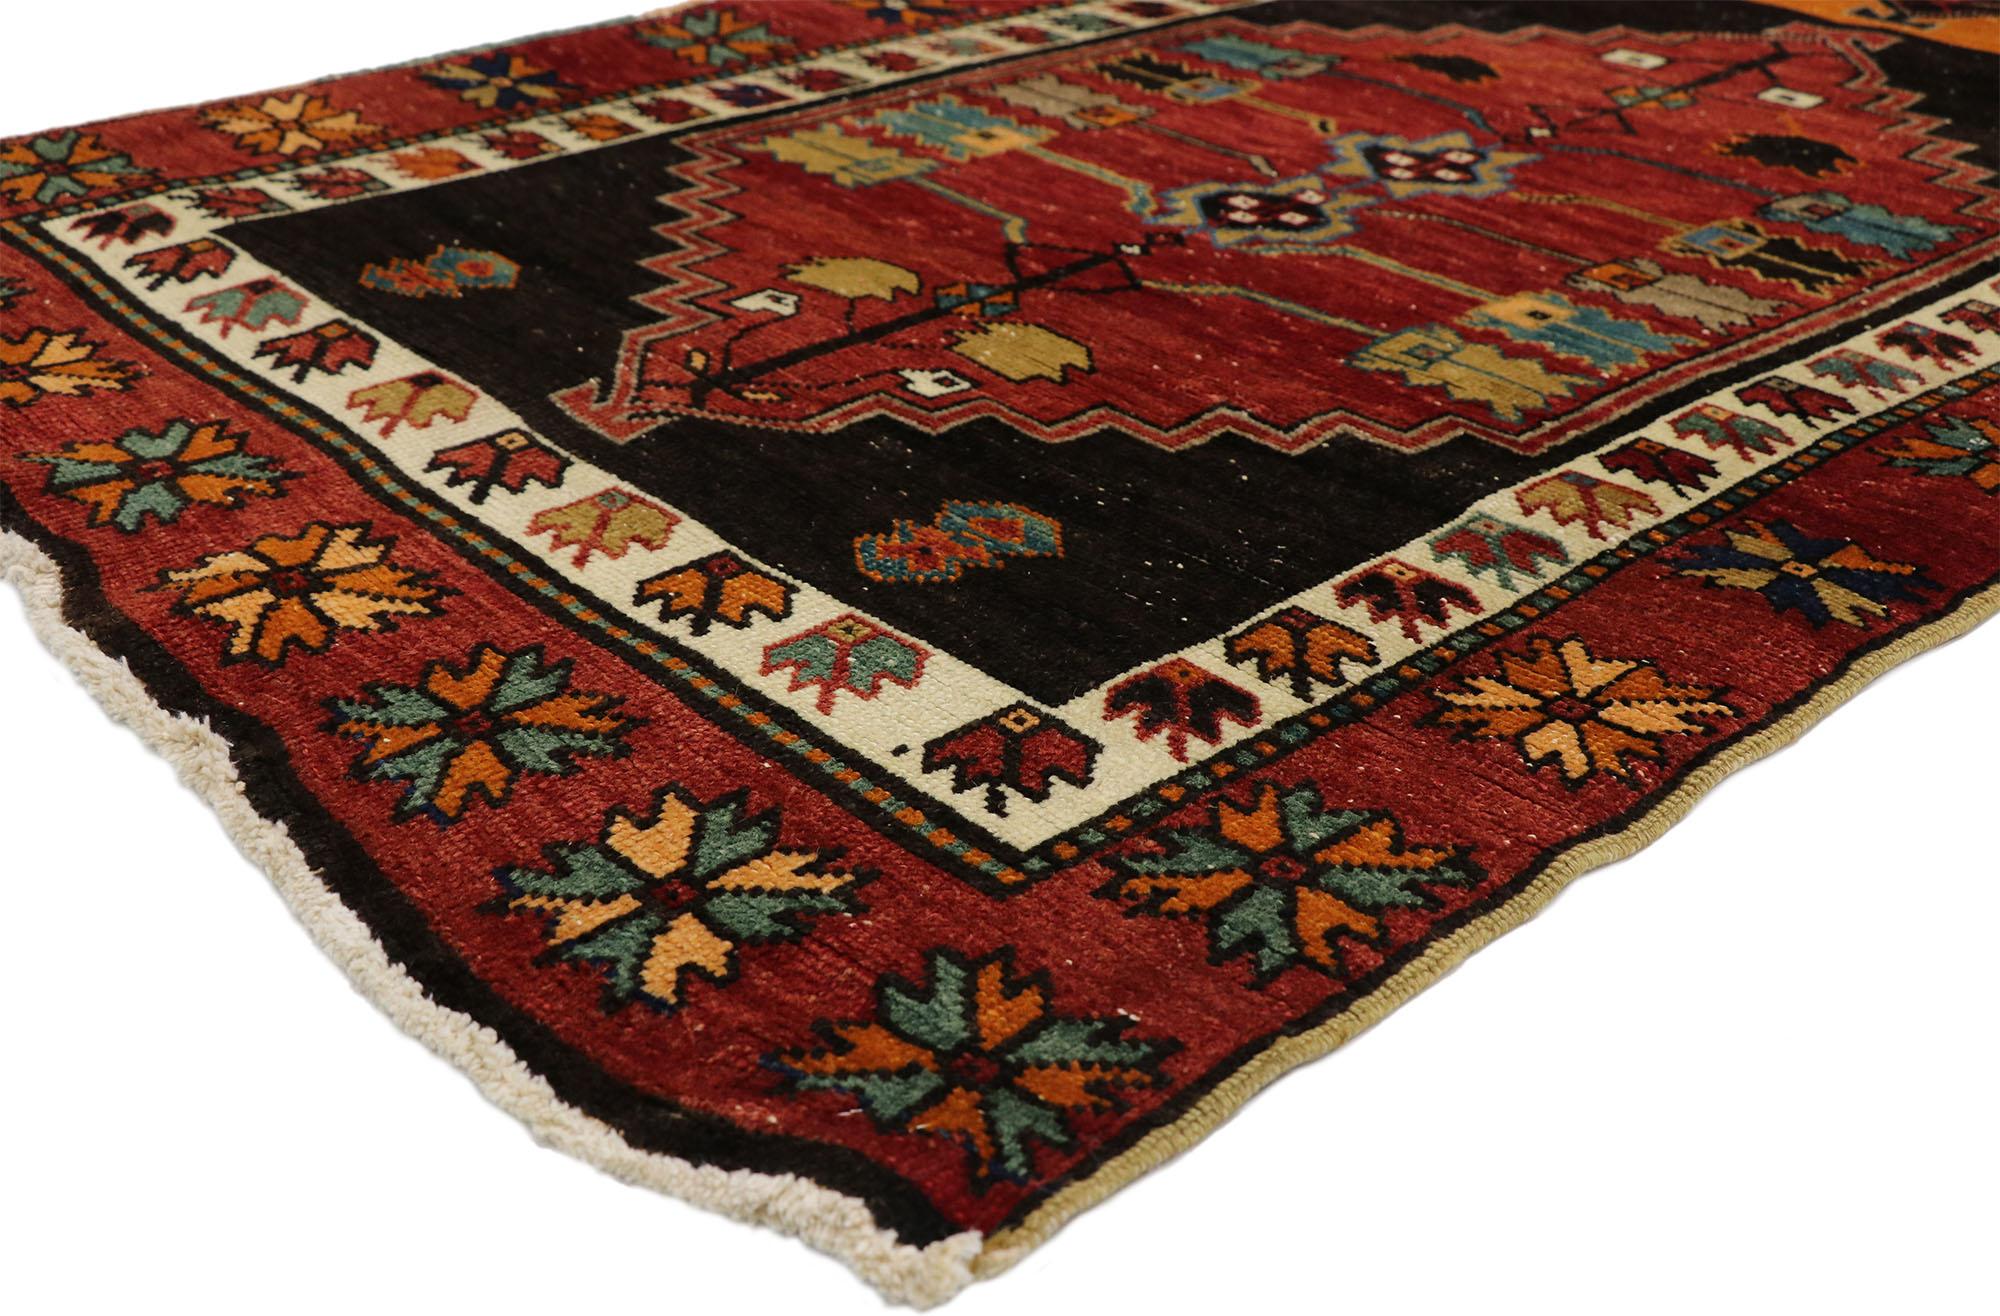 52145 vintage Turkish Oushak runner with Mid-Century Modern Tribal. This hand knotted wool vintage Turkish Oushak runner with Modern Tribal style features three hexagonal medallions with serrated edges in an abrash field surrounded by a geometric